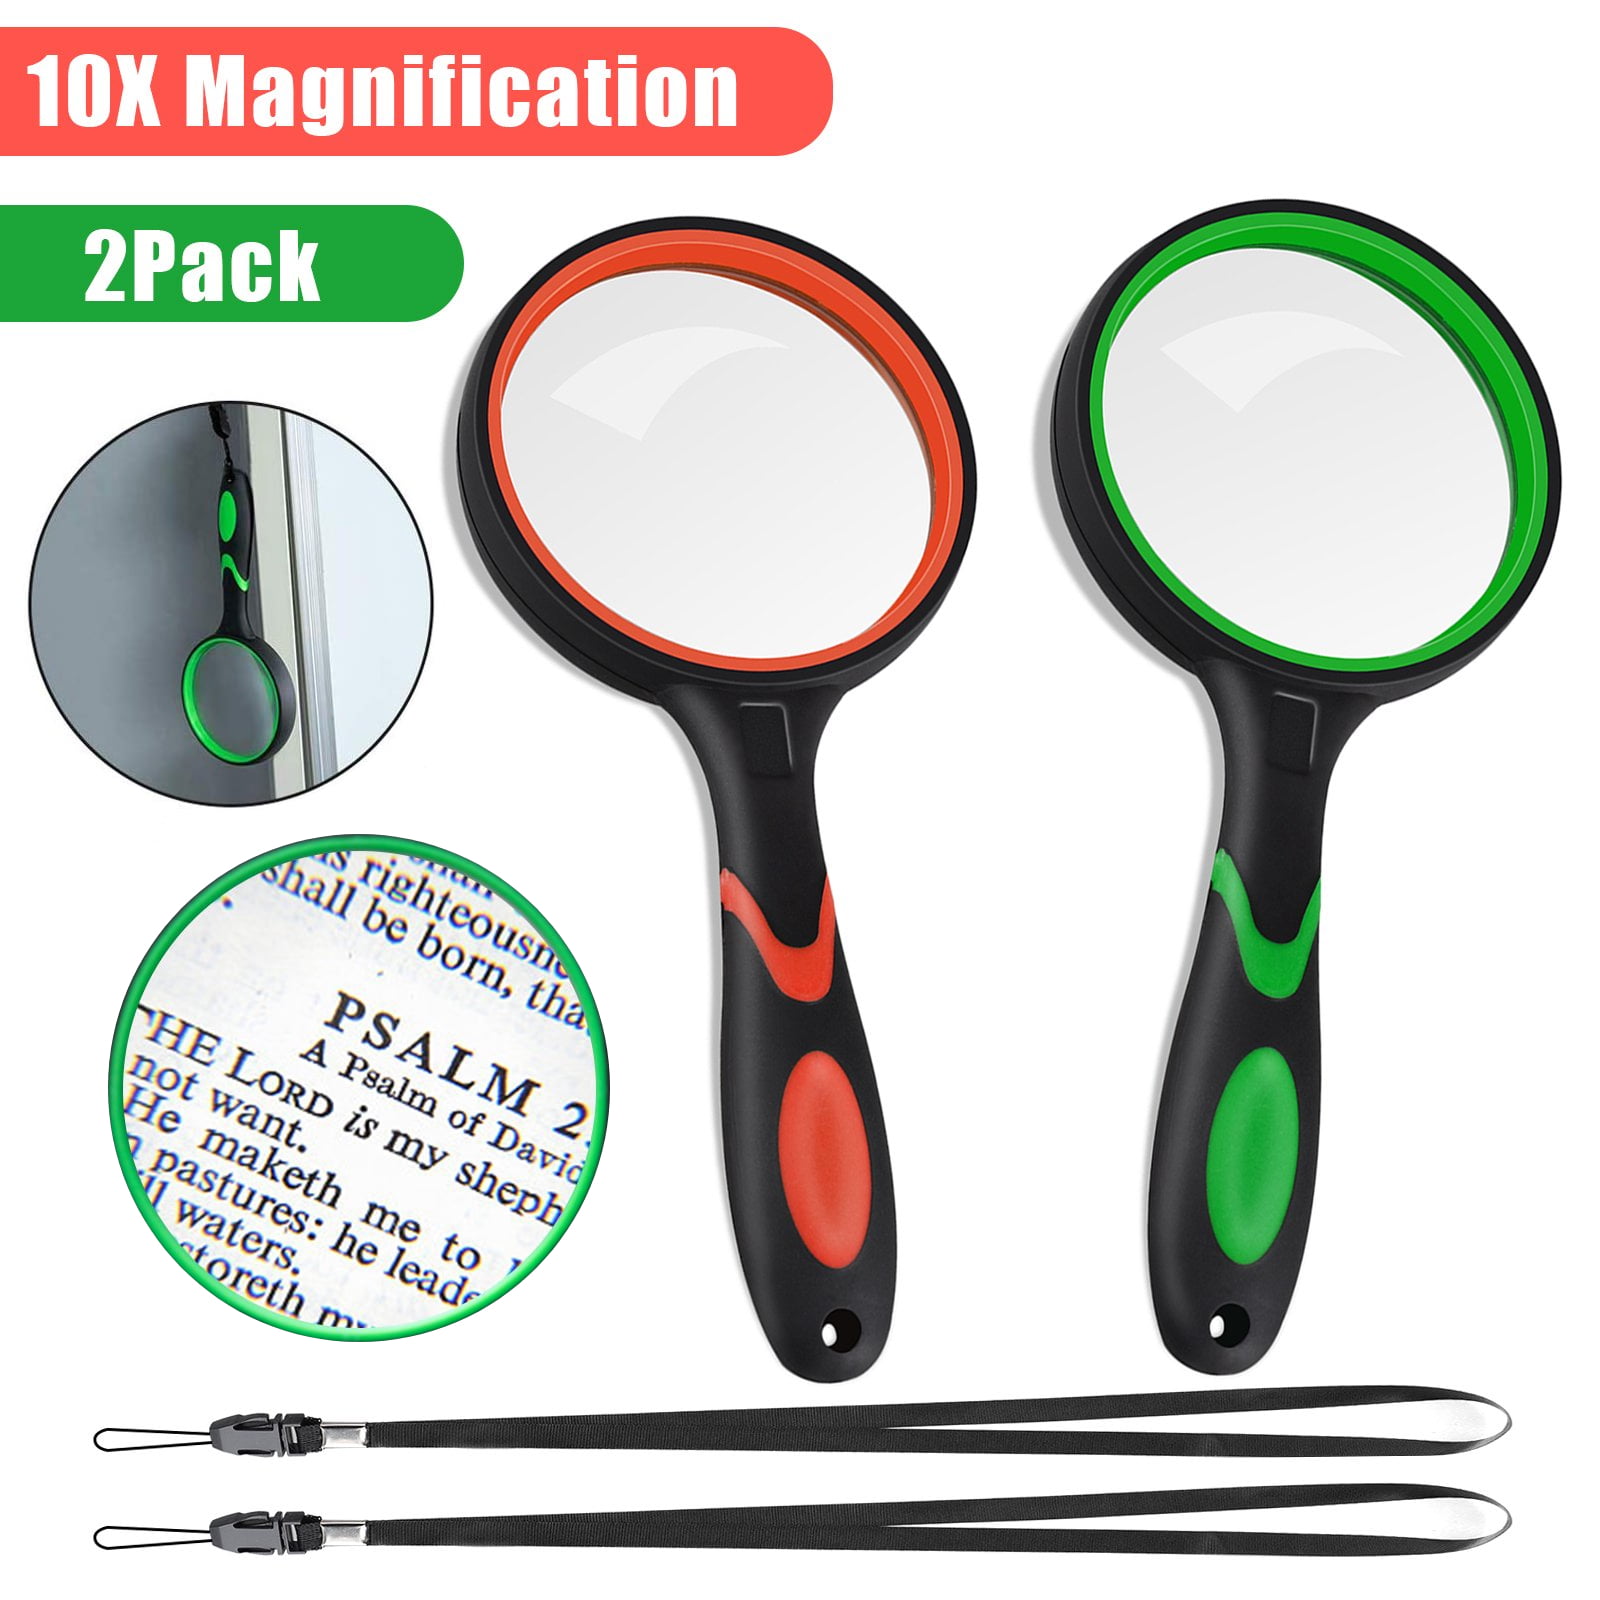 75MM Large Magnifying Lens,Non-Slip Magnifying Glass Toy for Kids Toddler,Handled Magnifying Glass for Reading,Close Work,Insect,Science,Hobby Observation 2Pack Magnifying Glass 10X